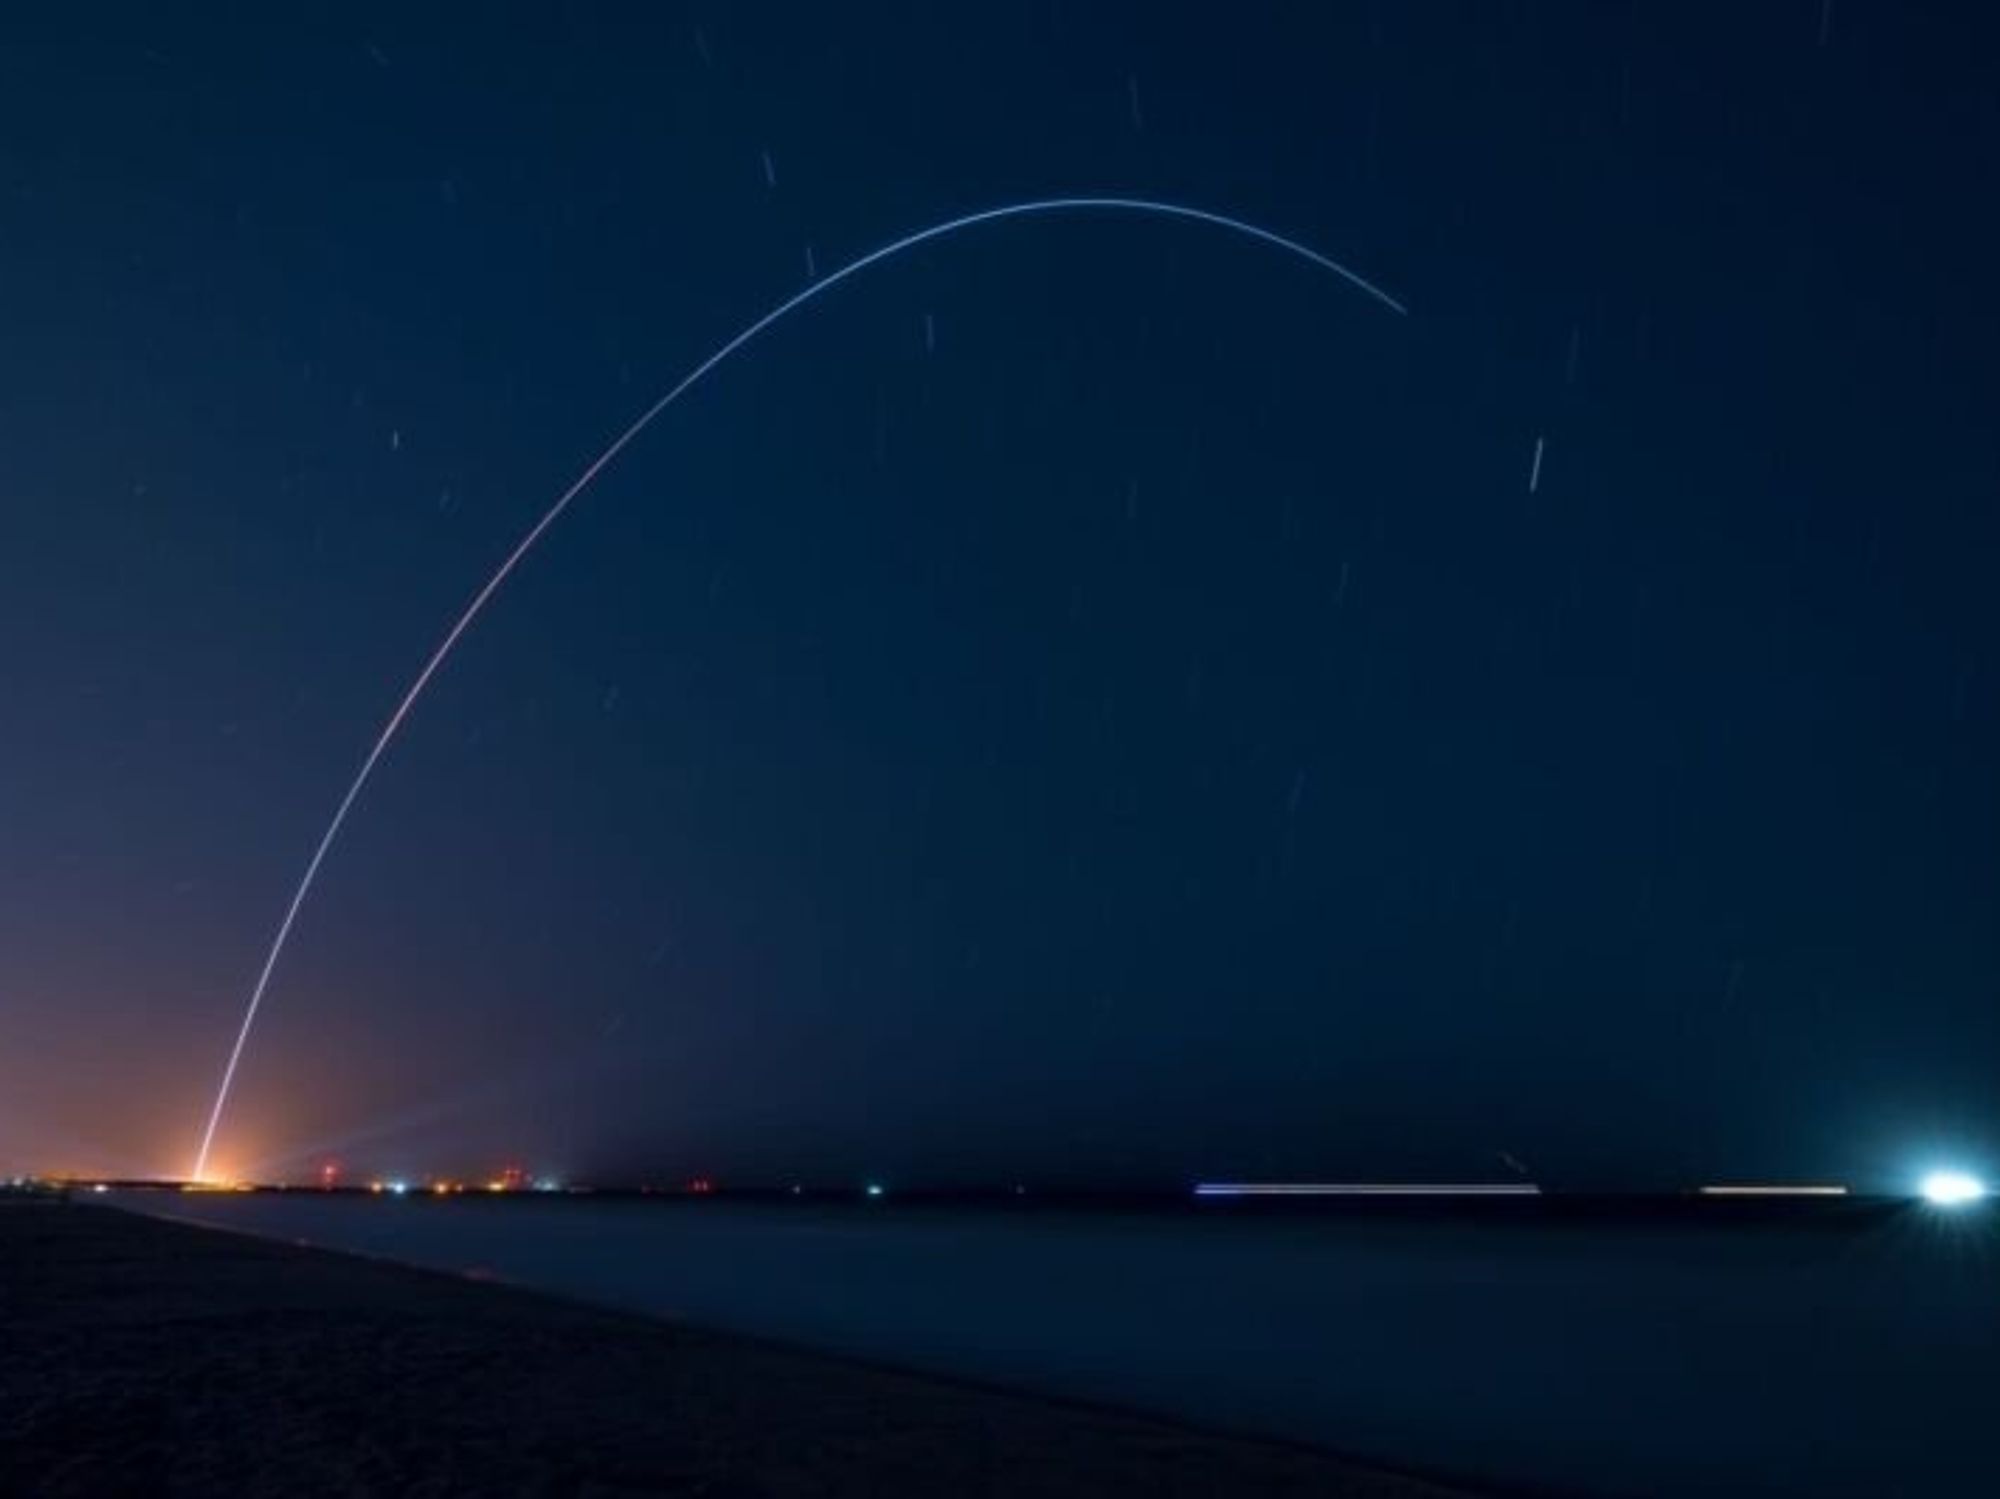 Relativity Space Launches World’s First 3D-Printed Rocket, But Falls Short of Orbit